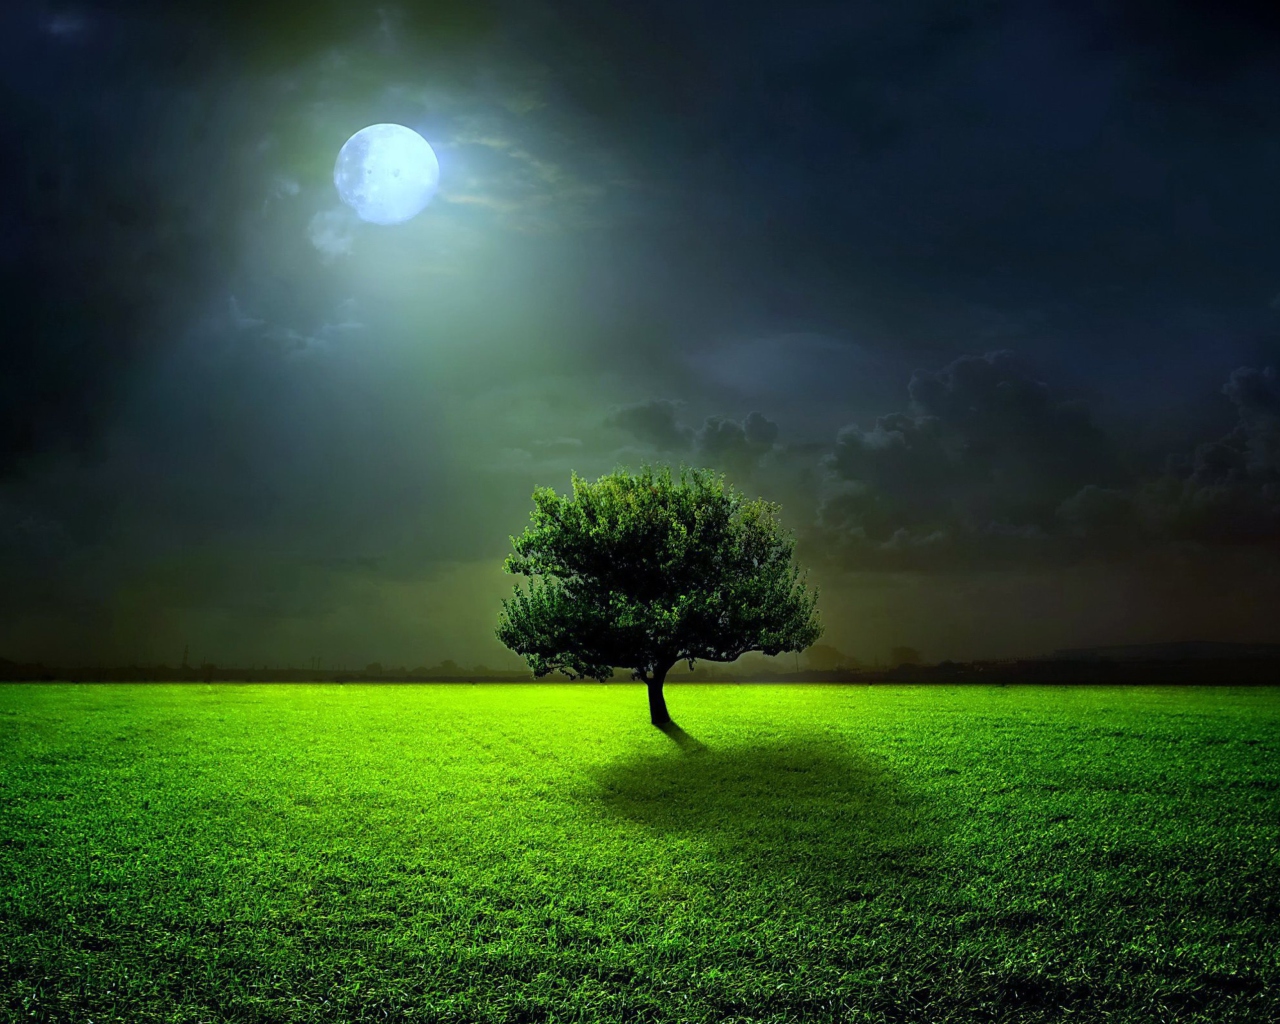 Evening With Lonely Tree wallpaper 1280x1024